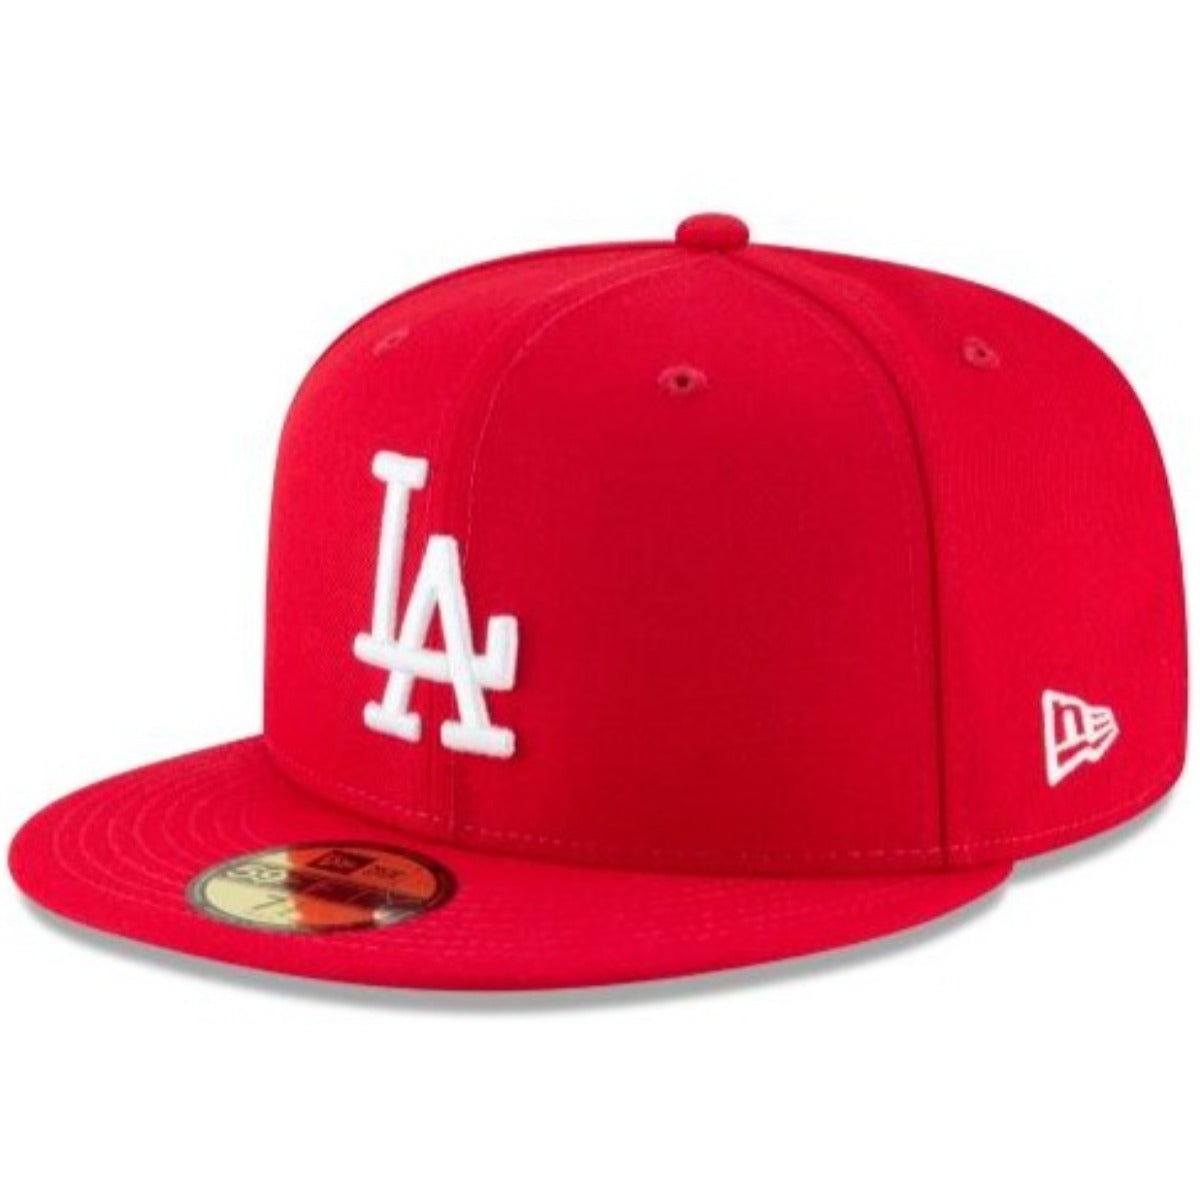 Los Angeles Dodgers 59FIFTY FITTED- Scarlet Nvsoccer.com Thecoliseum